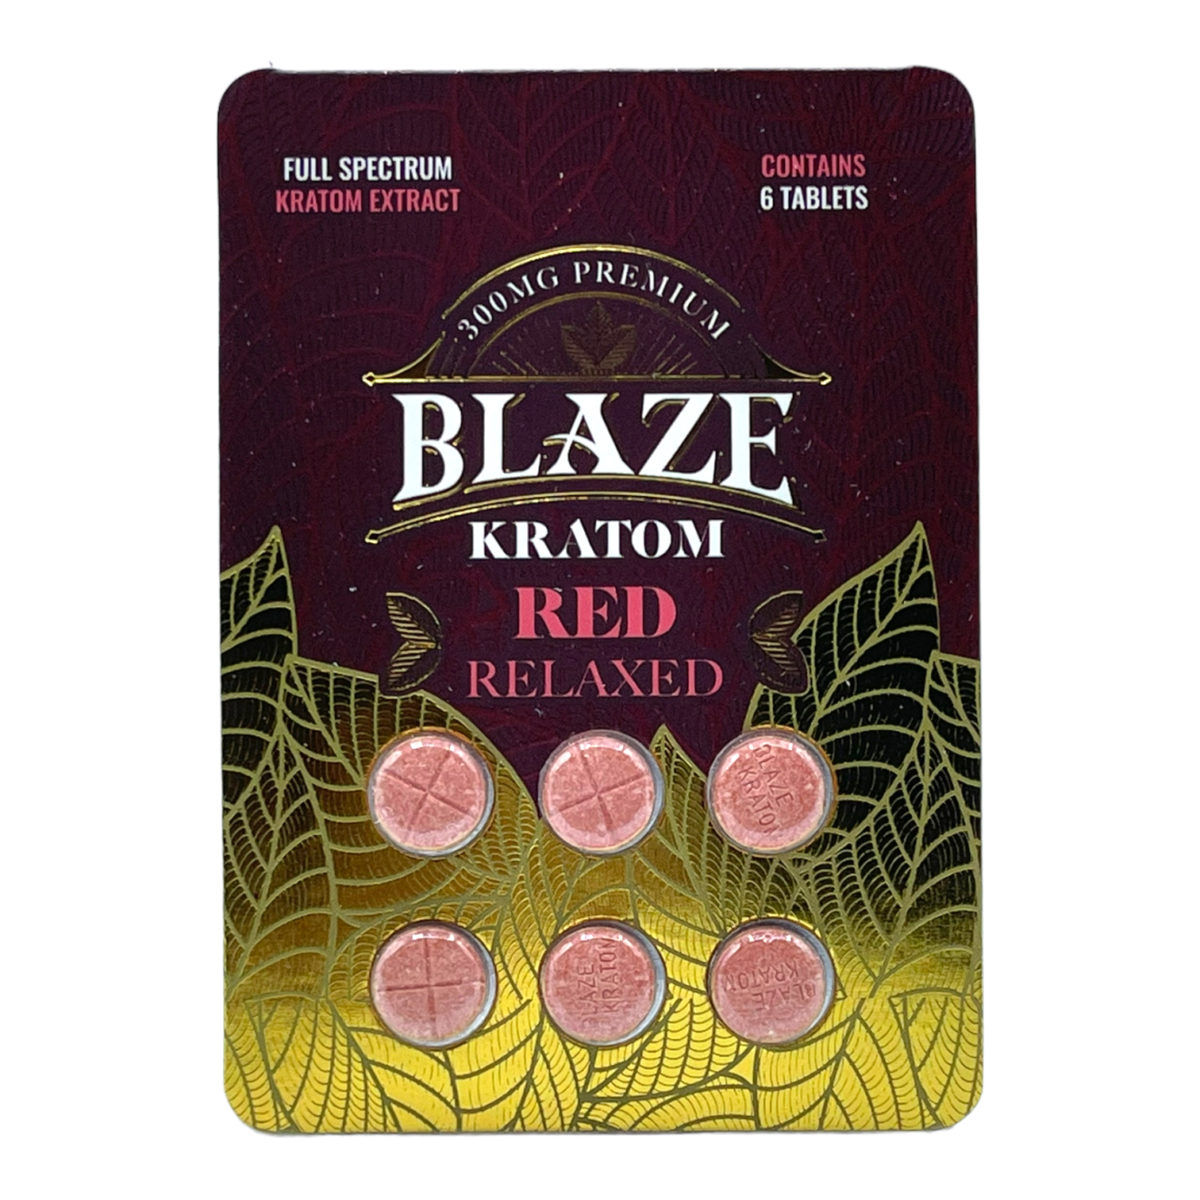 Blaze Red Relaxed Kratom Extract Tablets – 6 count